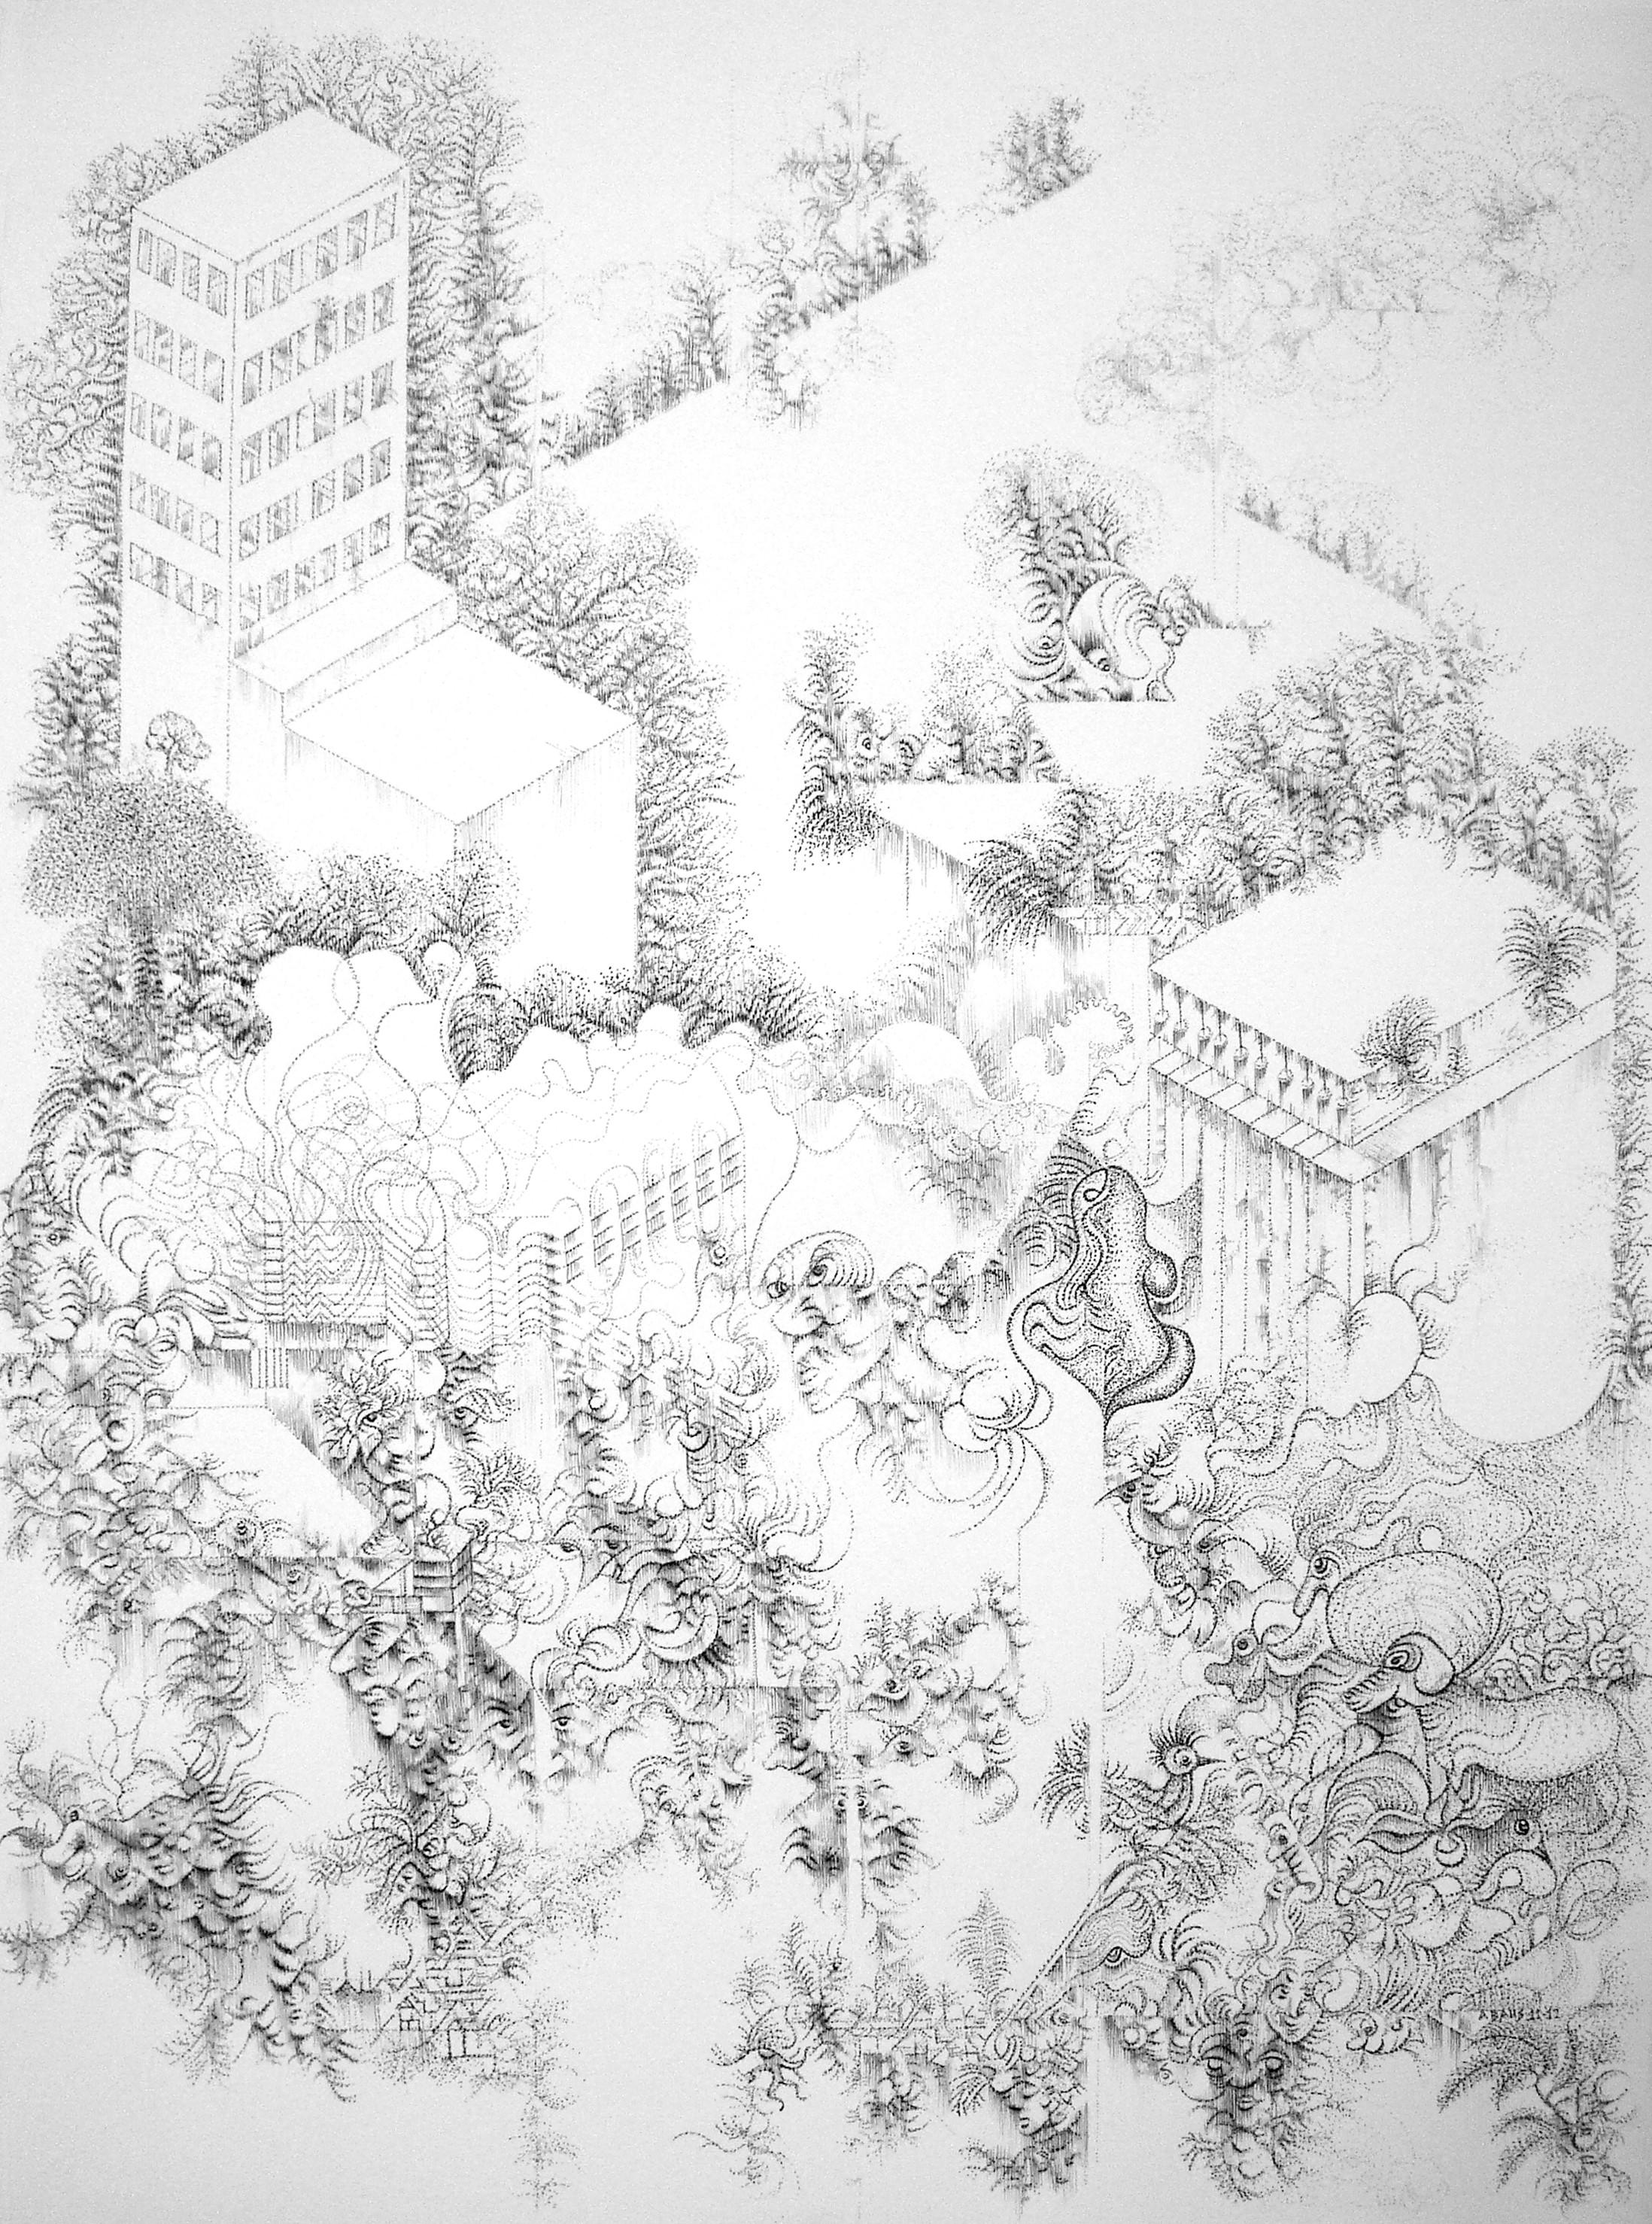 Andreas Vais,  dream city, 2012, 76 x 56 cm, indian ink on paper